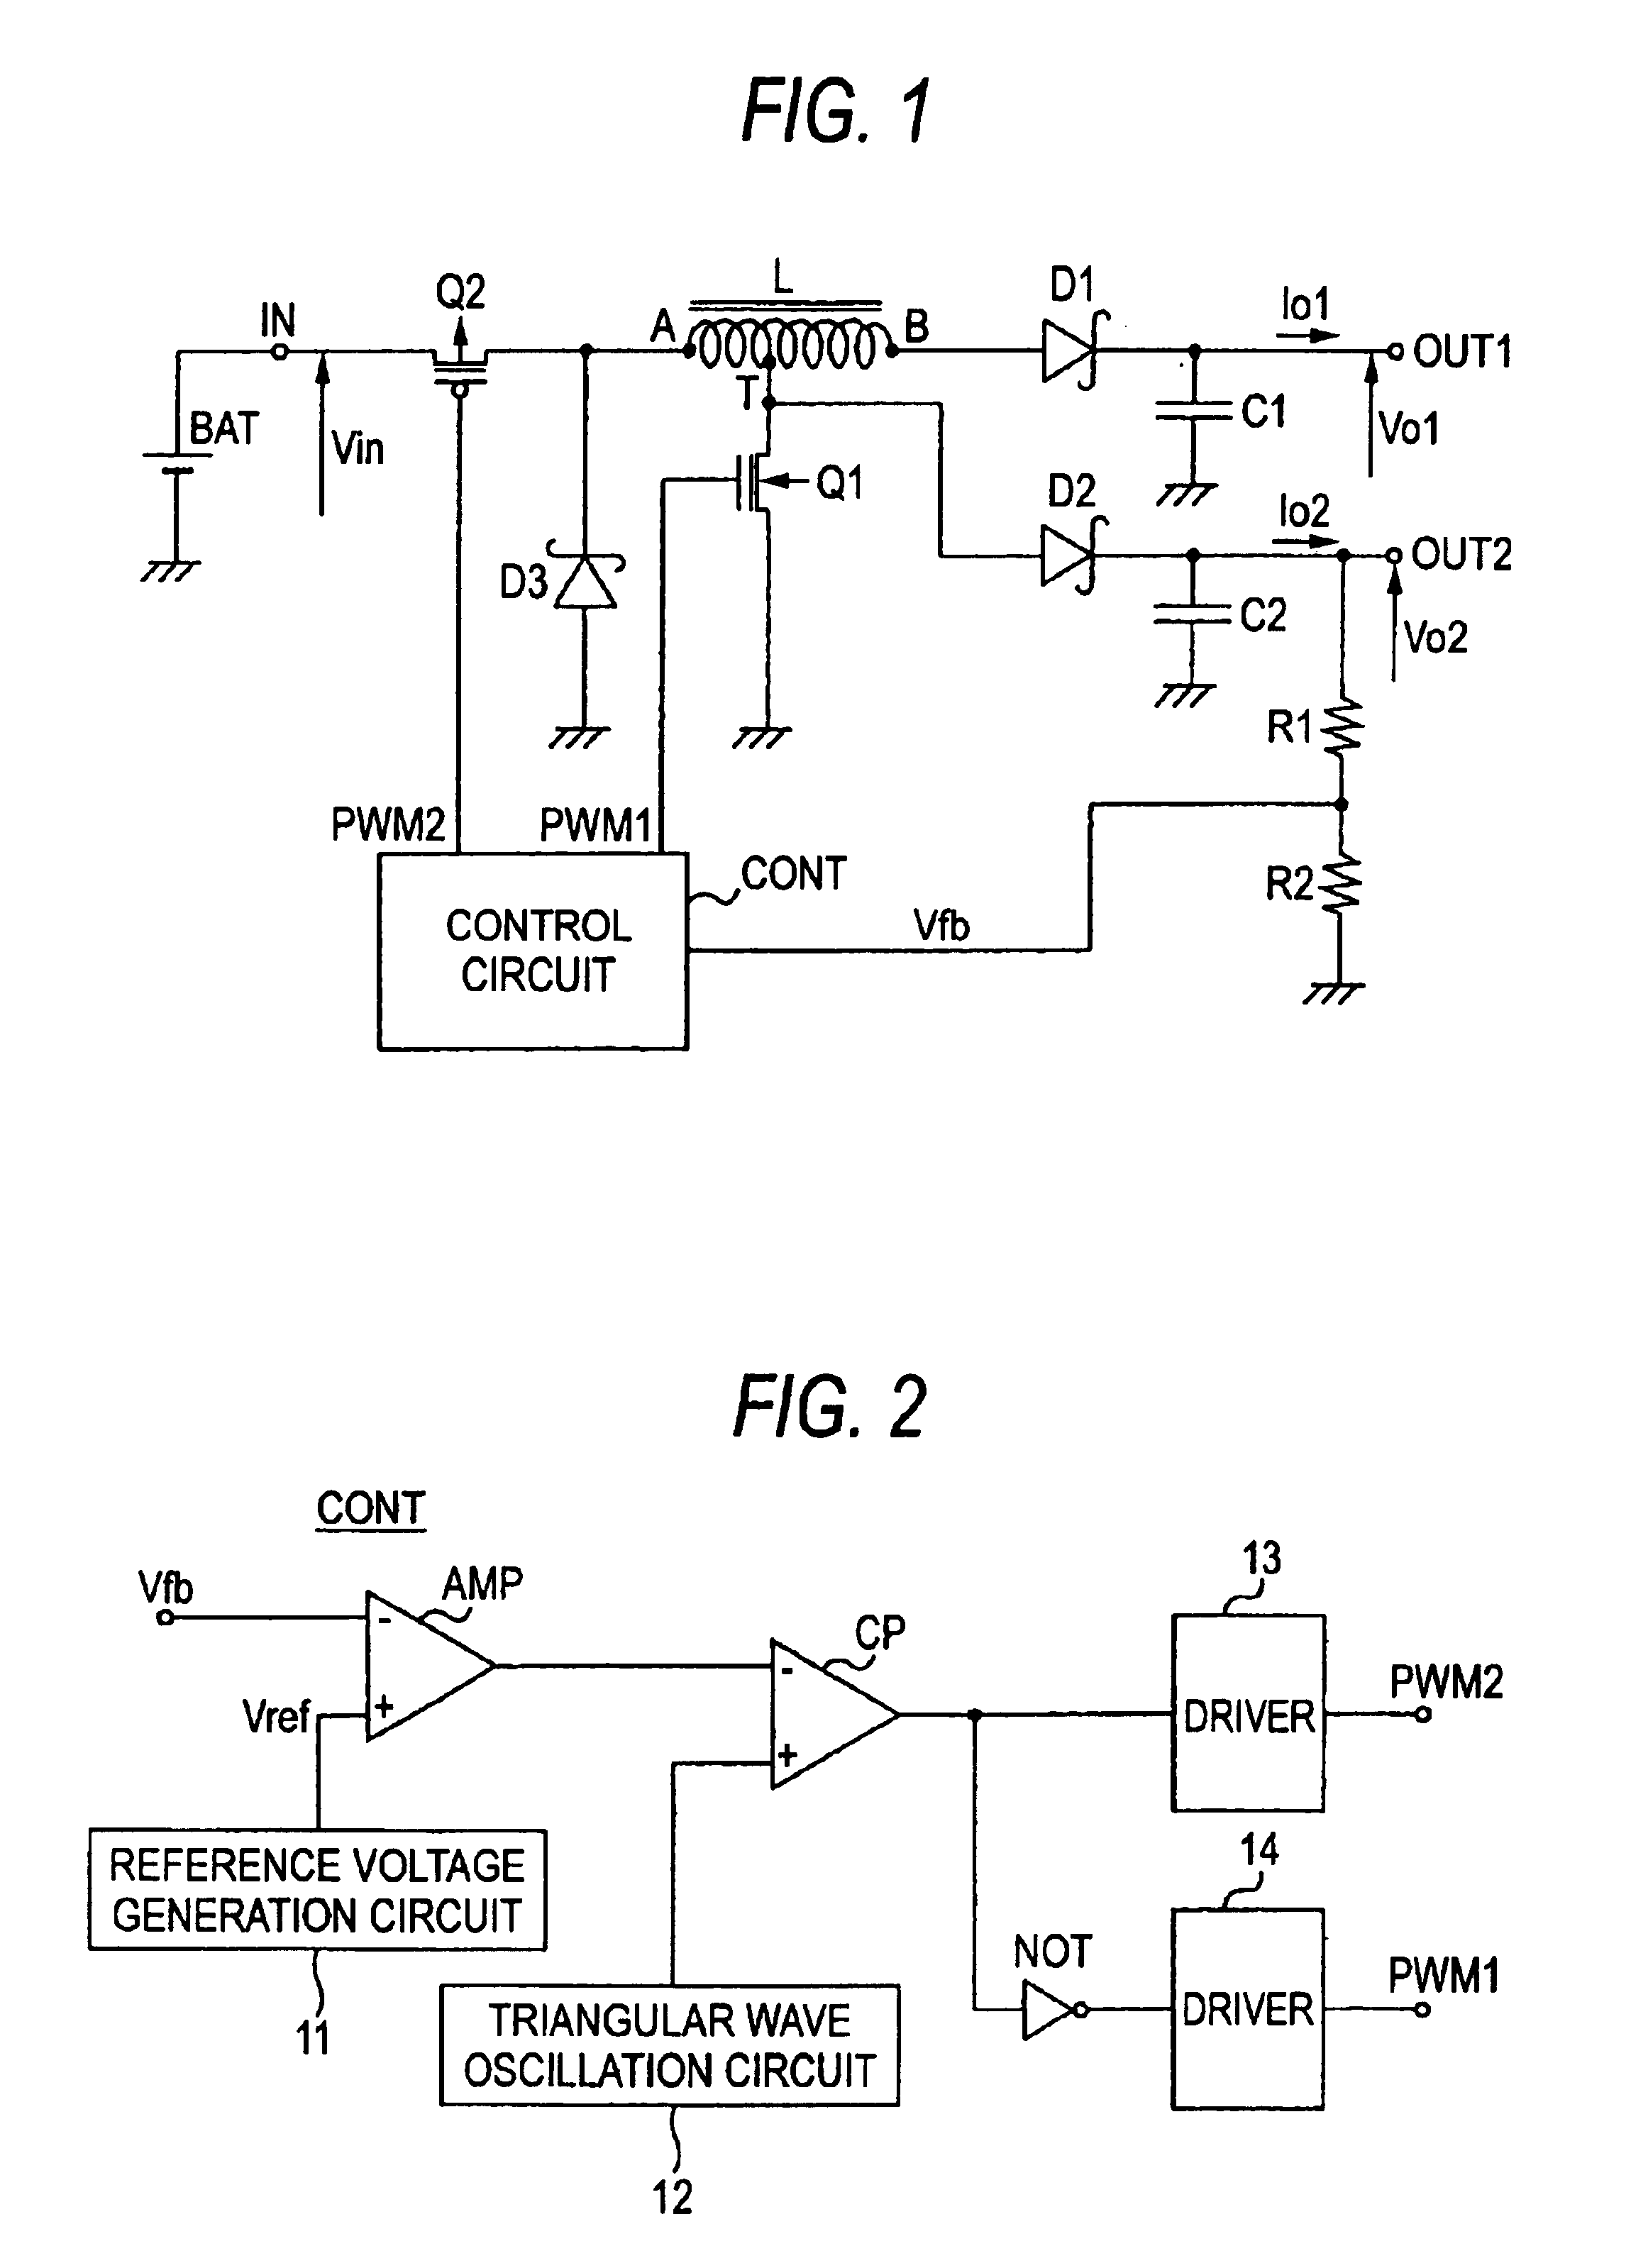 Switching power supply unit